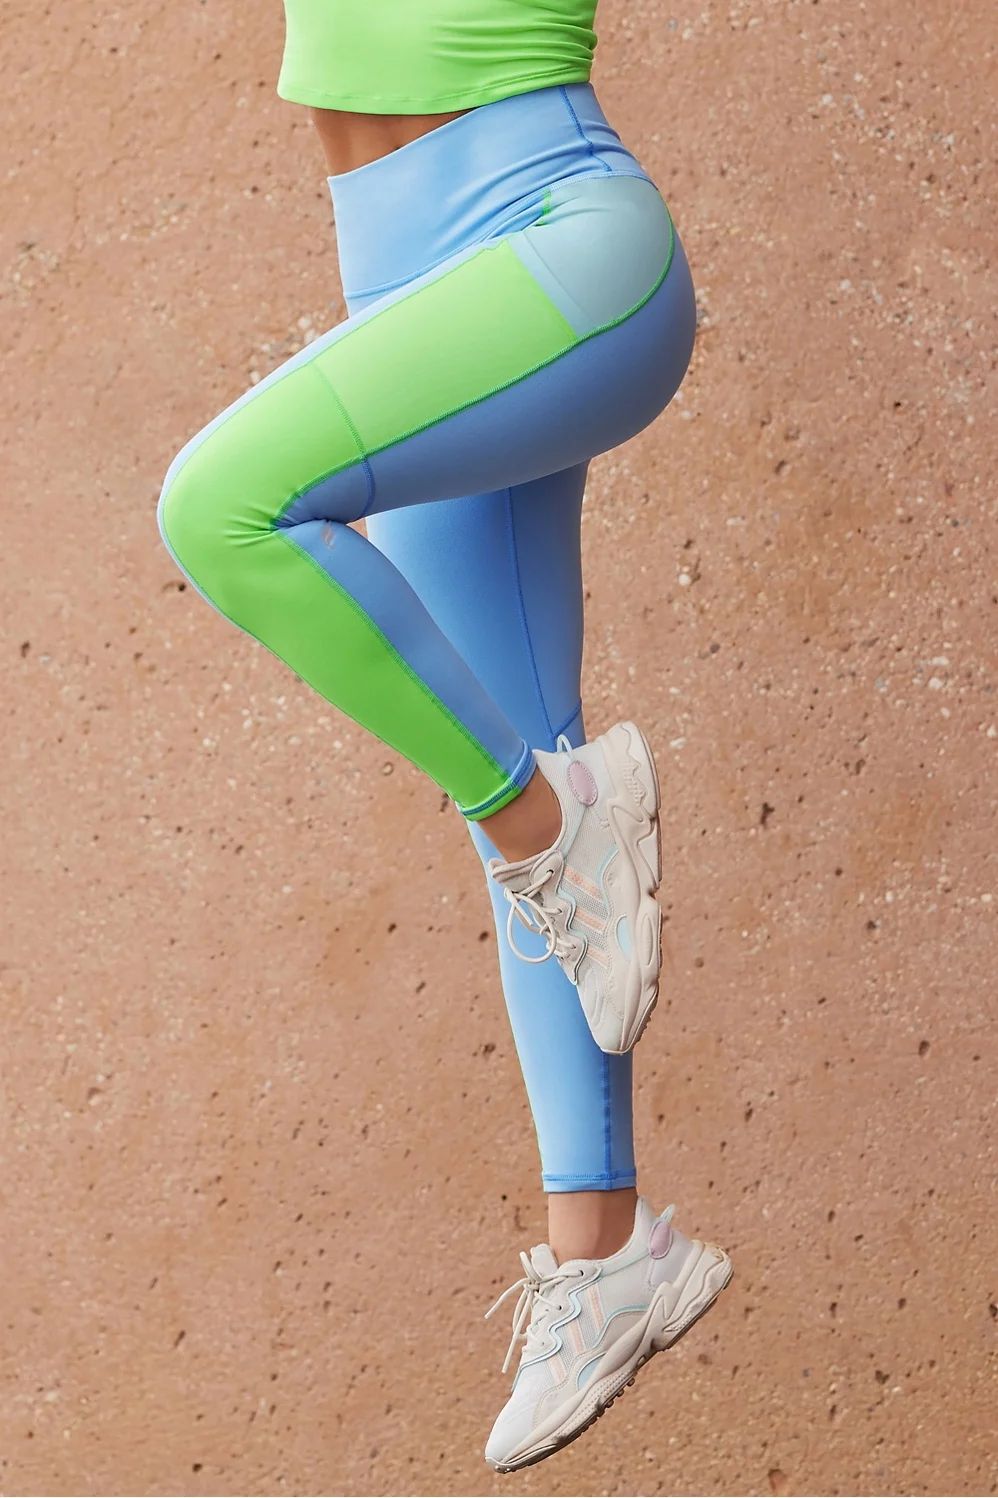 On-The-Go PowerHold® High-Waisted Legging | Fabletics - North America